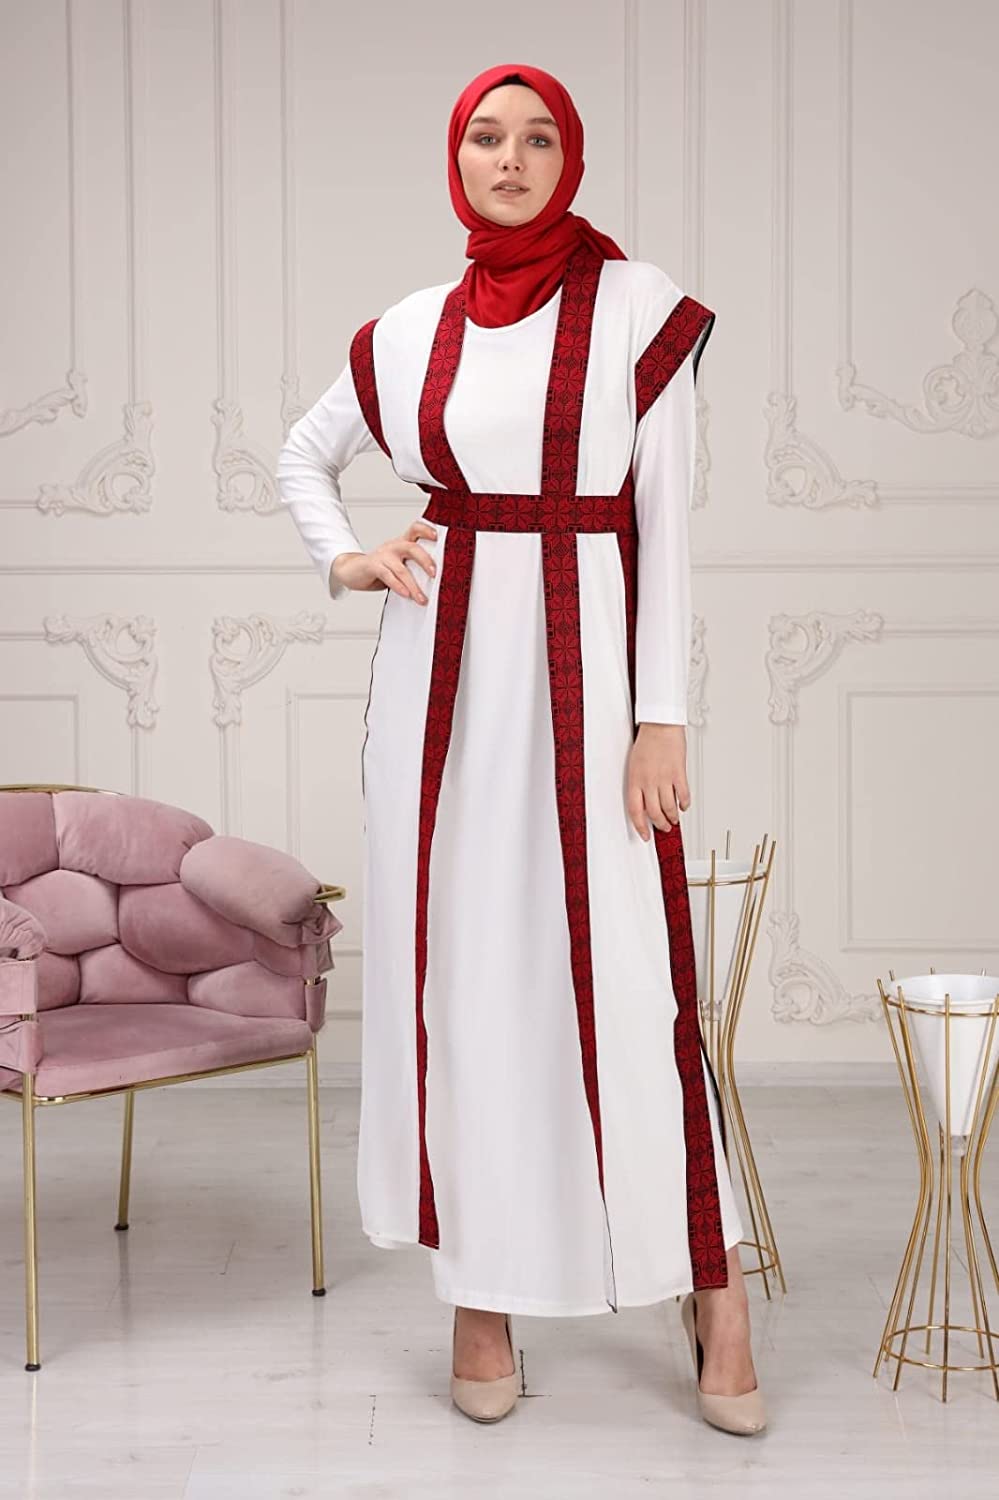 Marwa Fashion Palestinian Thobe Dress for Women - Traditional Palestinian Dress for Girl with Beautiful Embroidery - Dress for Wedding, Parties and Dinner White